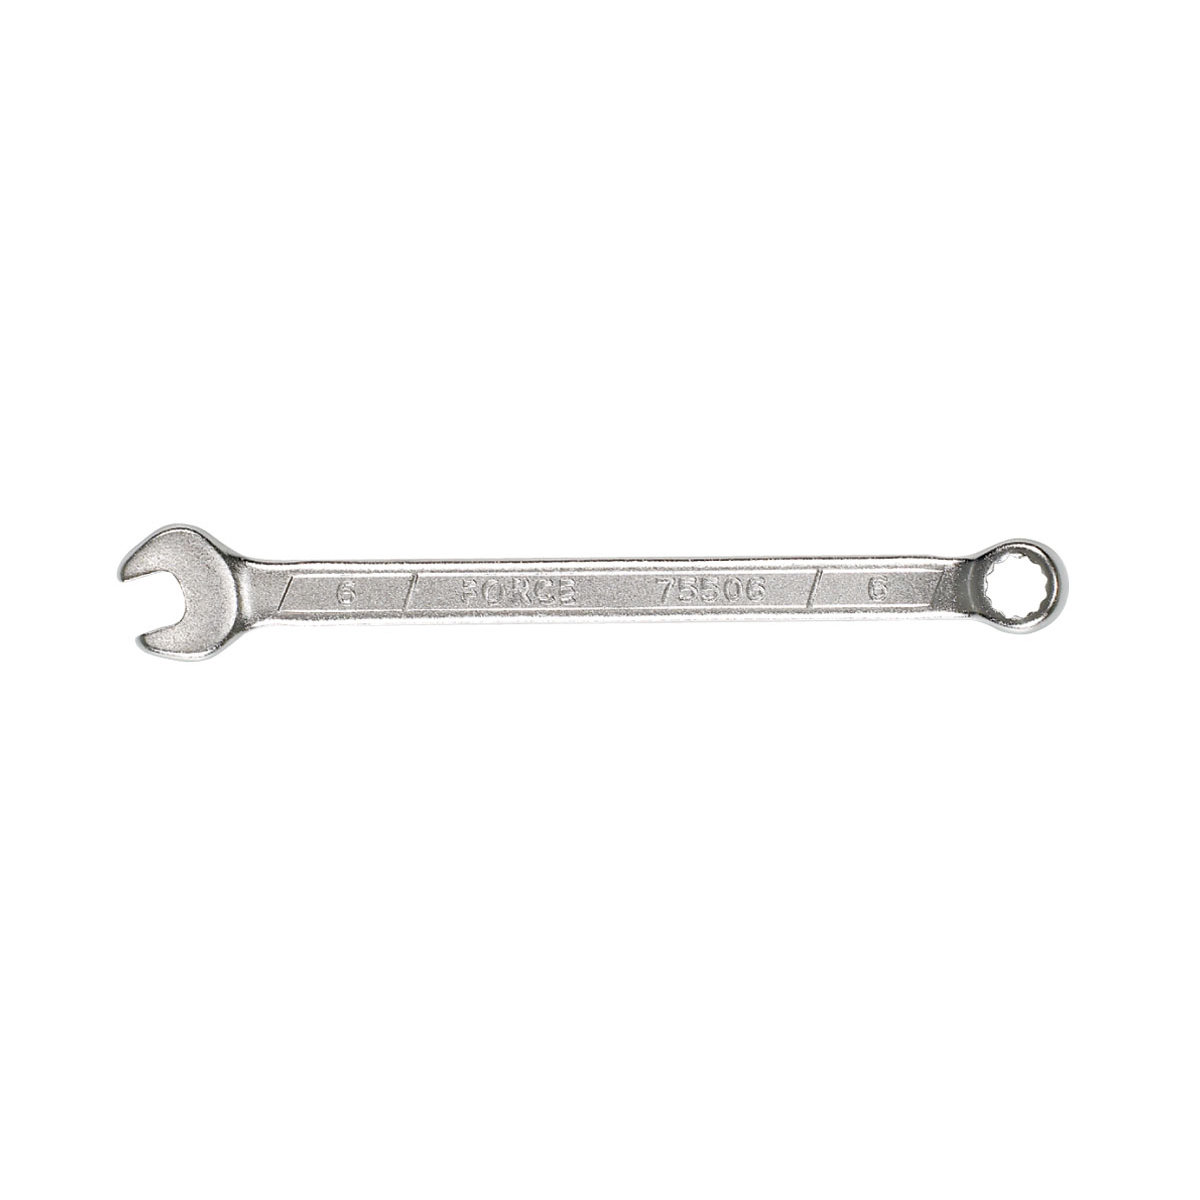 CYCLO 18mm Open/Ring Spanner